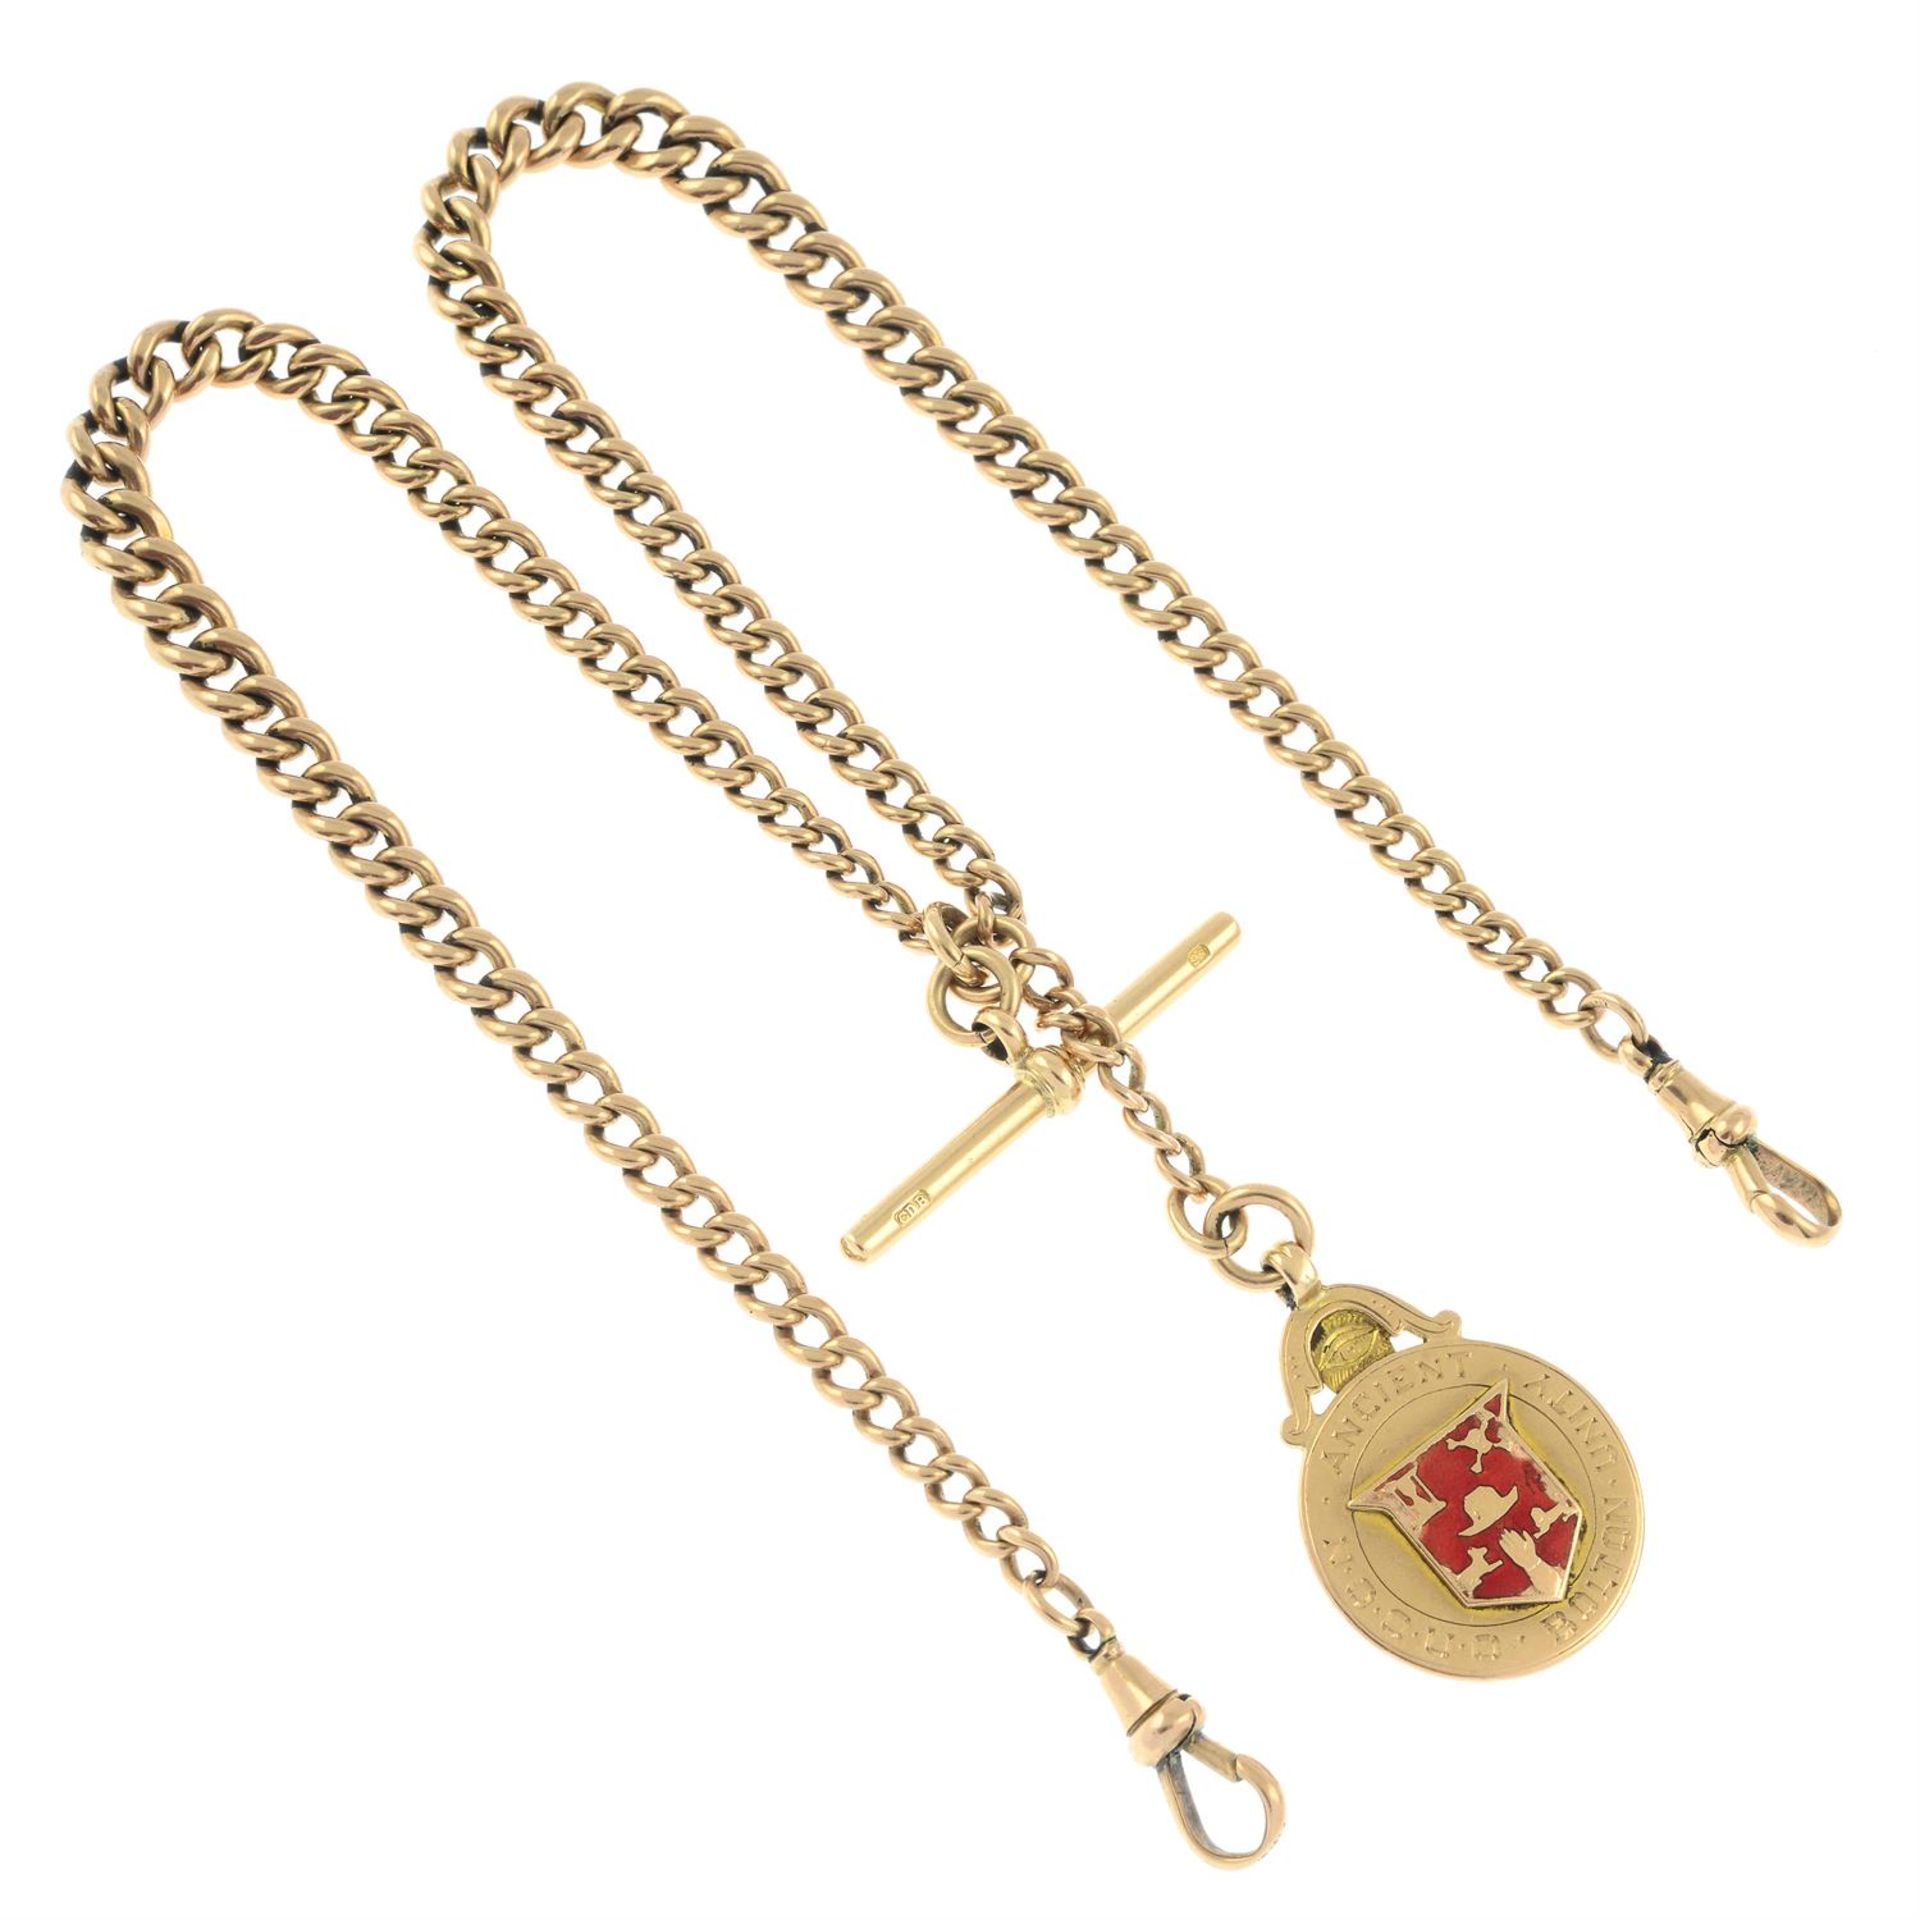 An early 20th century 9ct gold Albert, suspending a 9ct gold and enamel Masonic fob.